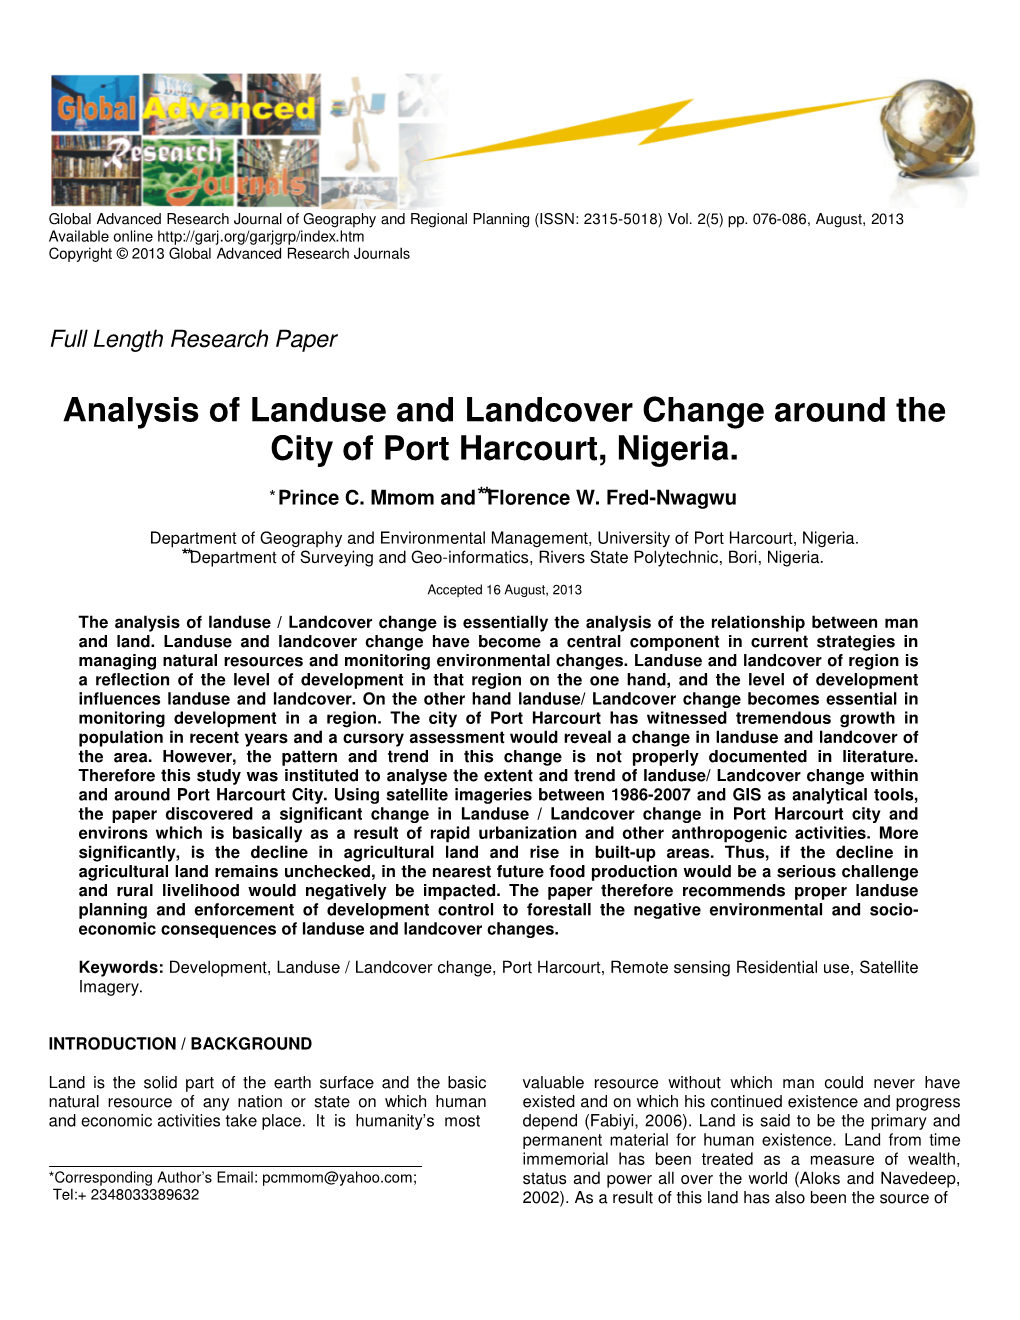 Analysis of Landuse and Landcover Change Around the City of Port Harcourt, Nigeria